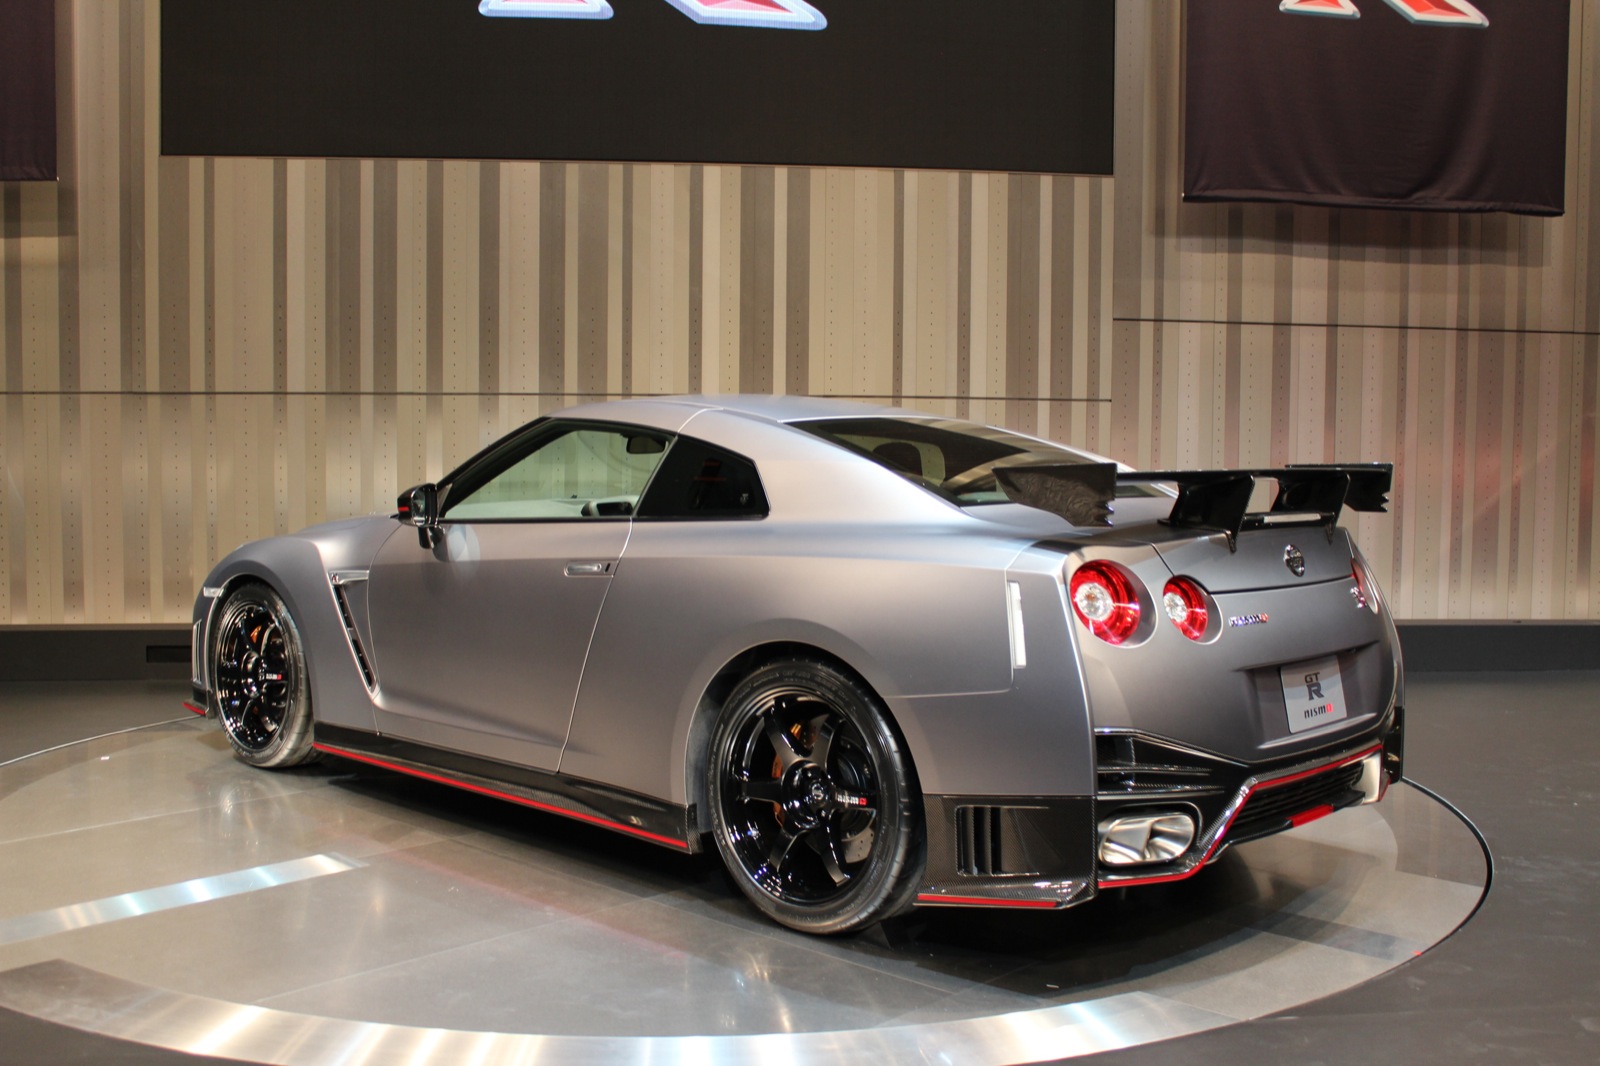 2015-nissan-gt-r-nismo--tokyo-motor-show-preview-event-nissan-global-headquarters_100446449_h